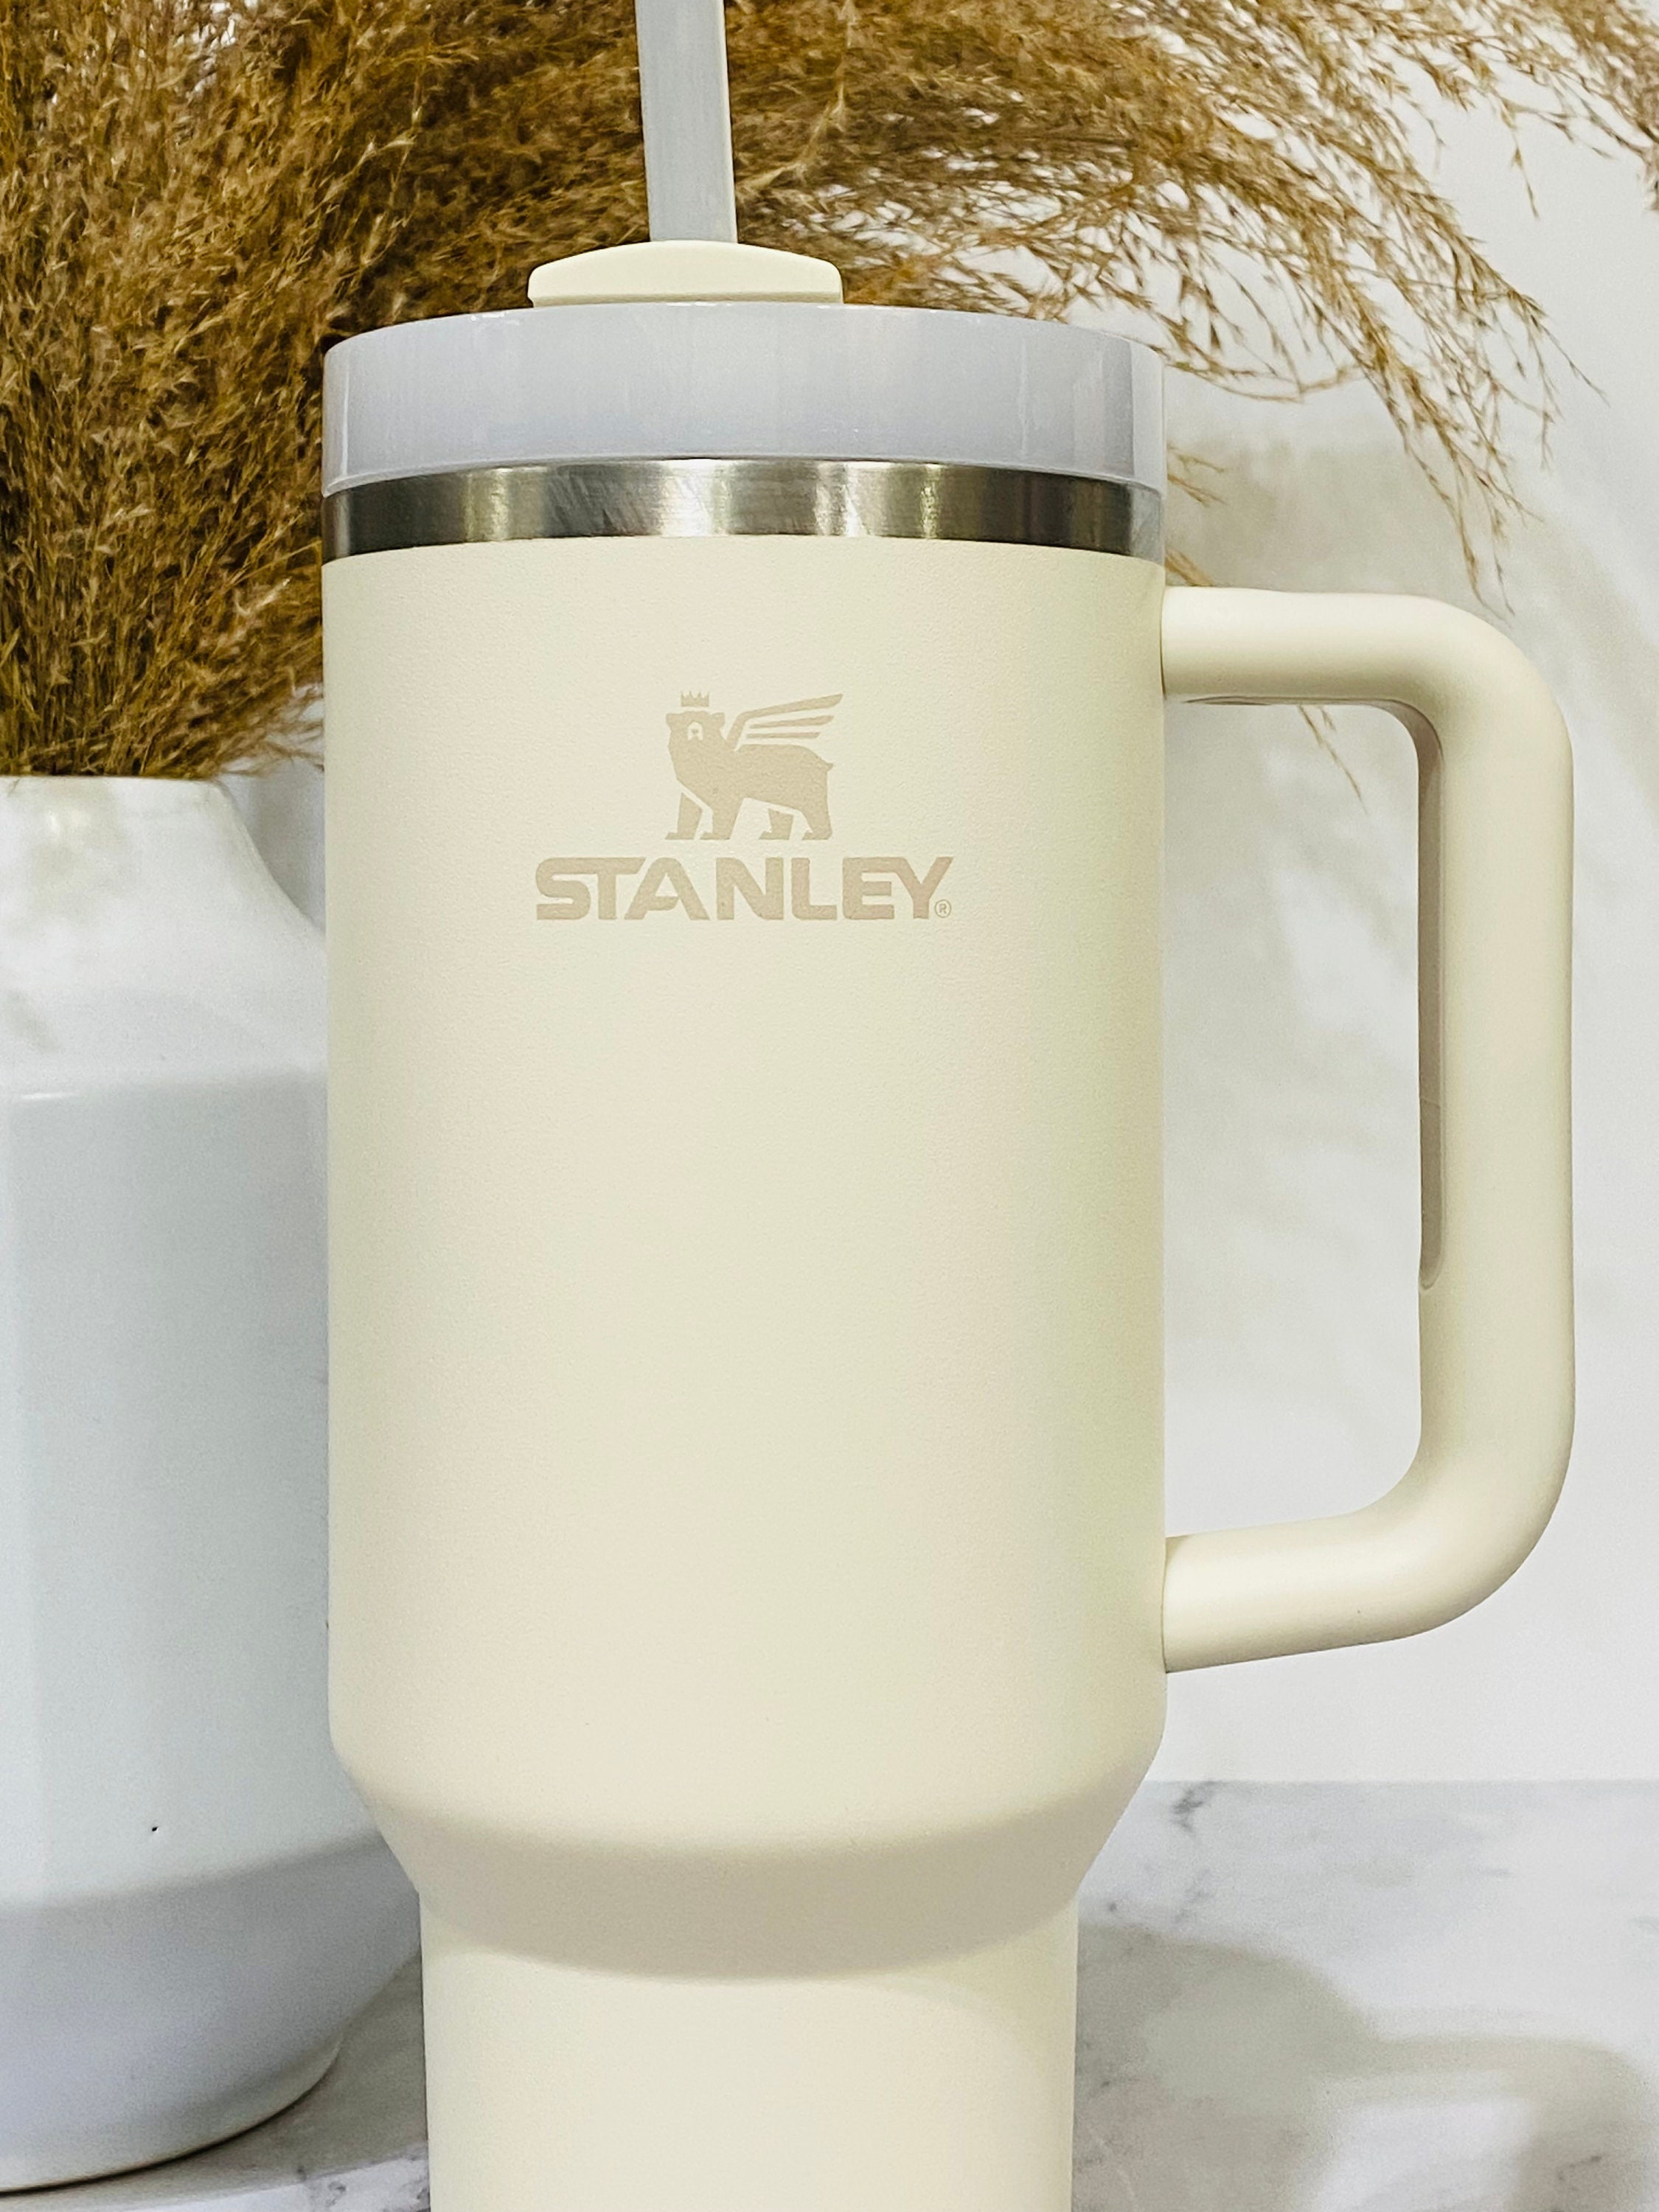 Teacher Engraved Personalized Stanley Quencher H2.0 Tumbler - Teacher –  TinRoofLaseredGoods